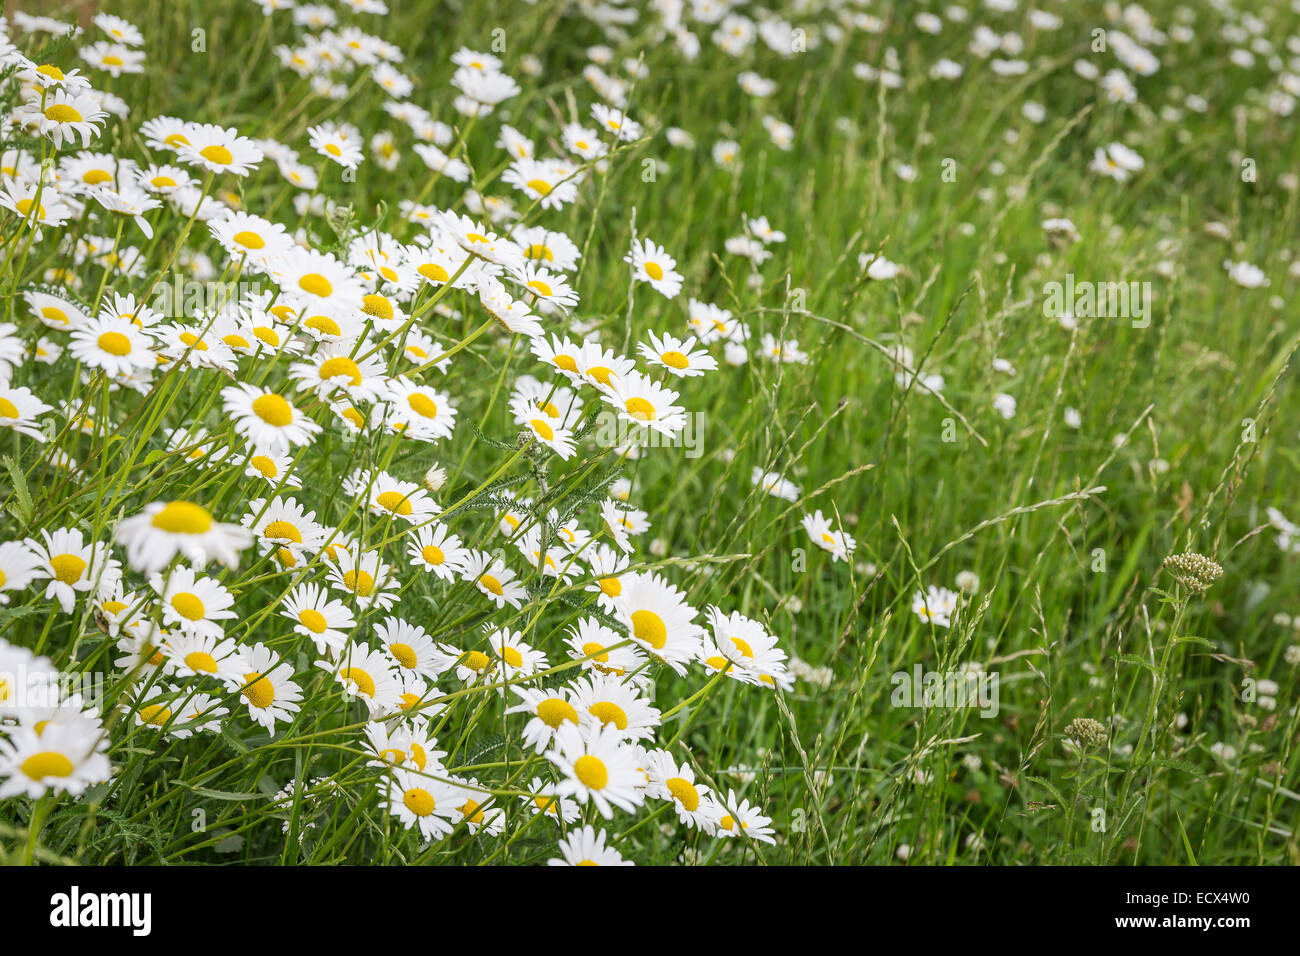 Perfect daisy flower meadow in spring time Stock Photo